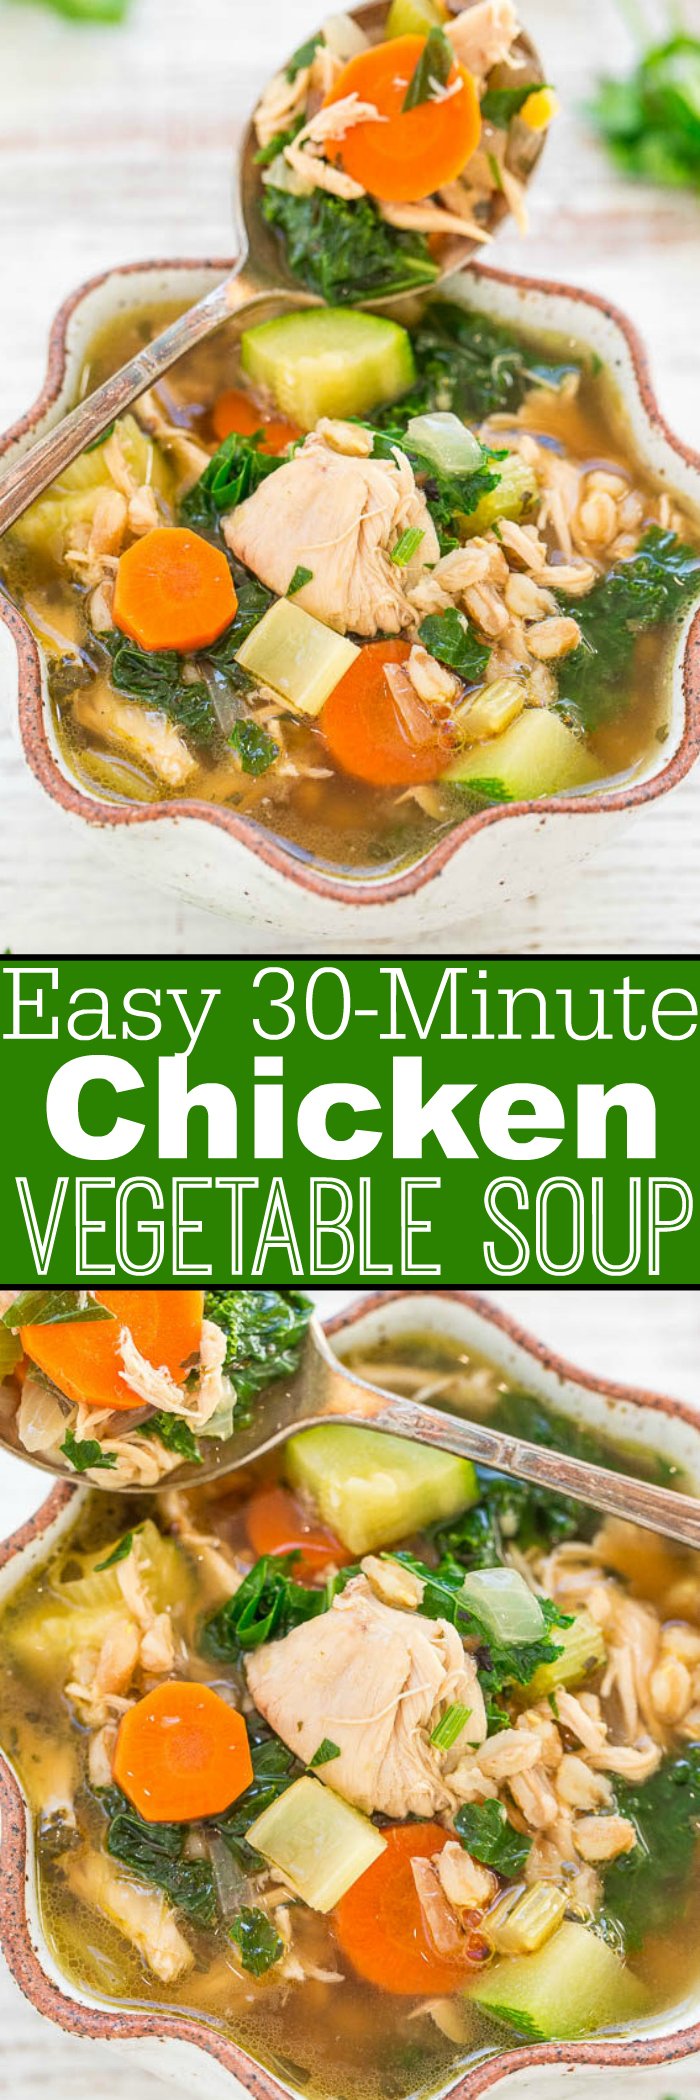 Easy 30-Minute Chicken Vegetable Soup - Extra veggies instead of noodles in this HEALTHY, easy chicken soup that's so FAST to make!! Hearty, filling, and satisfying! Perfect for weeknight dinners and chilly nights!!